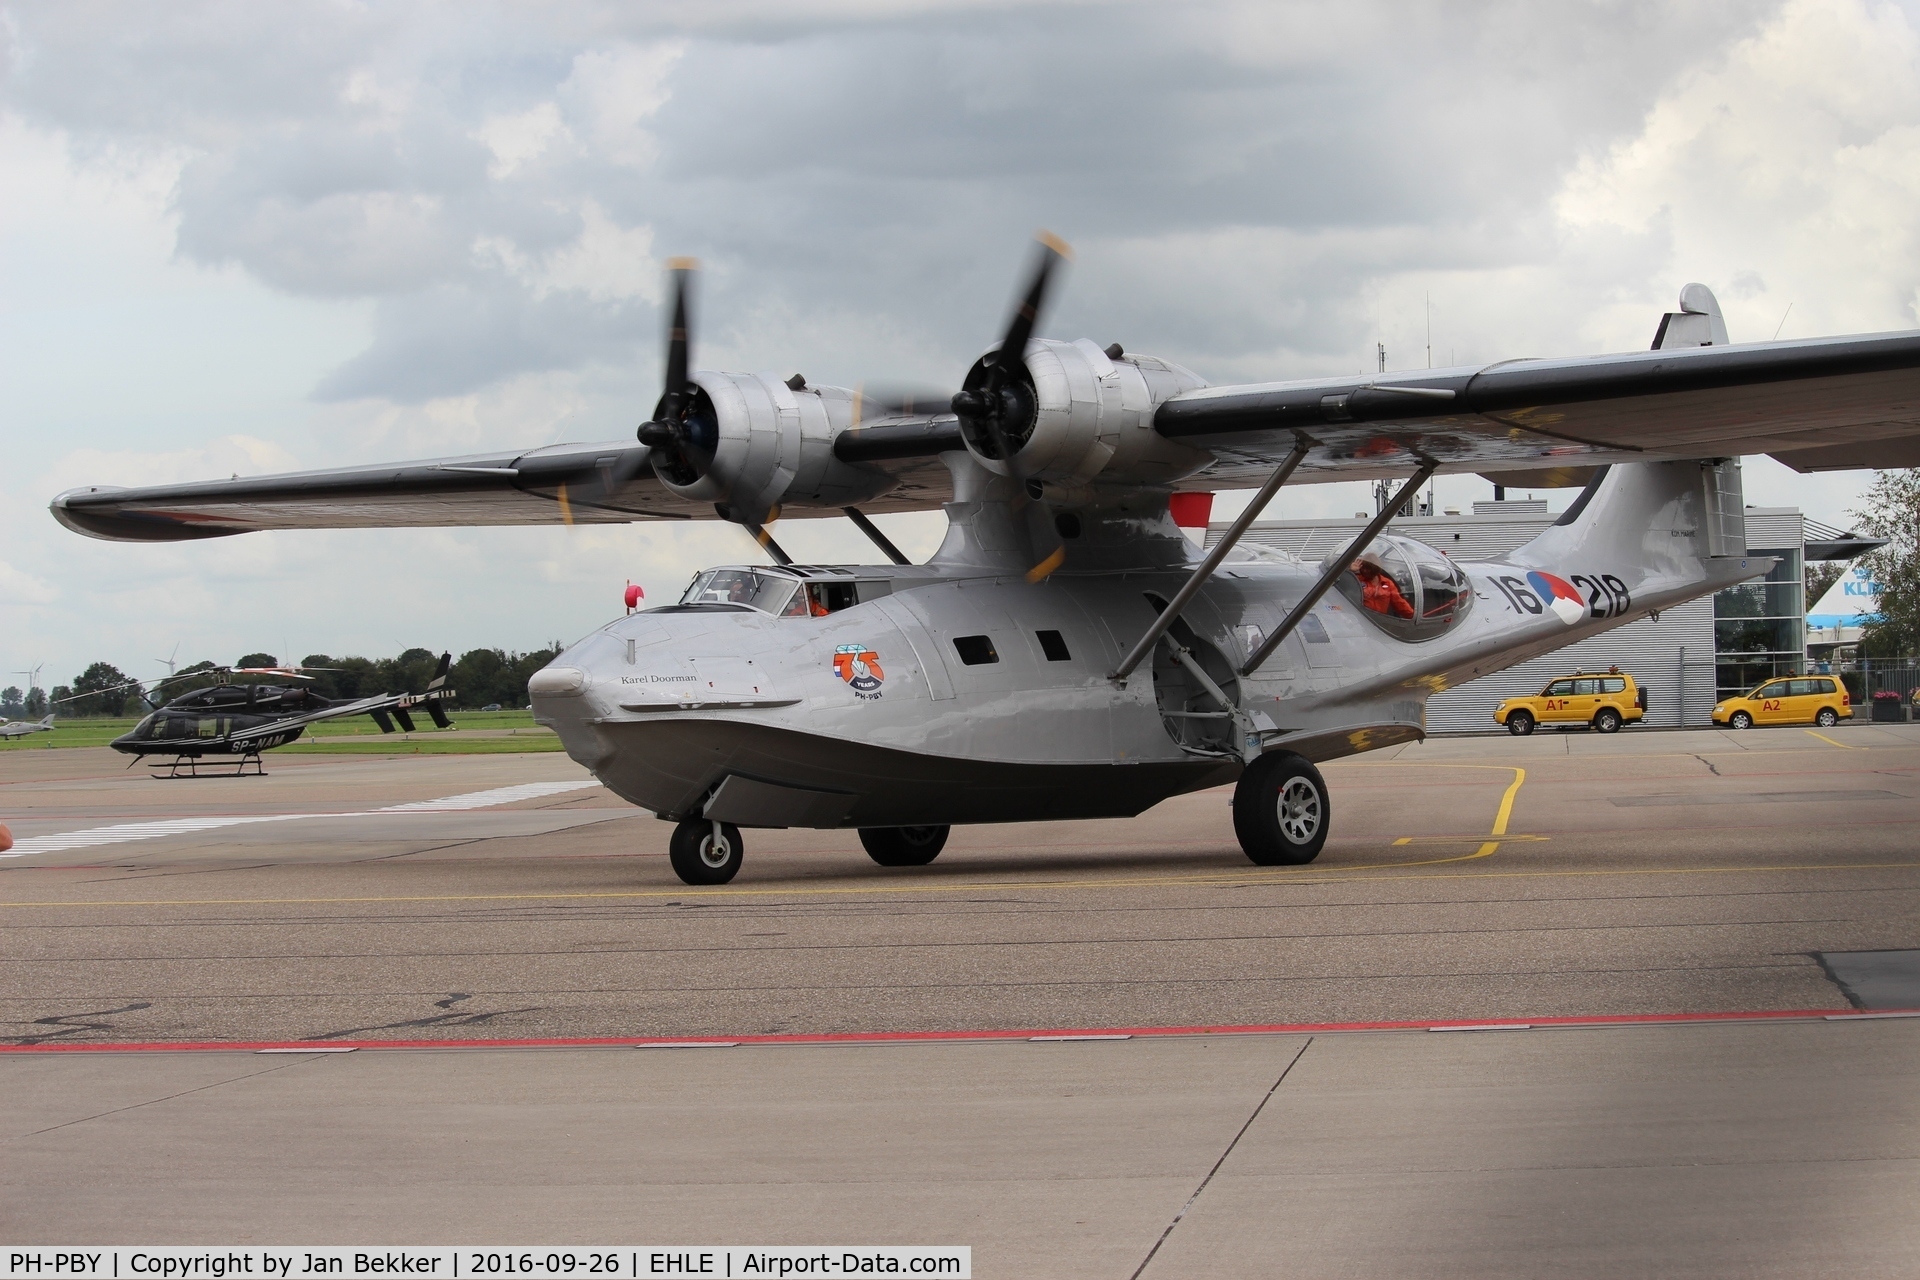 PH-PBY, 1941 Consolidated PBY-5A Catalina C/N 300, With 75 year sticker